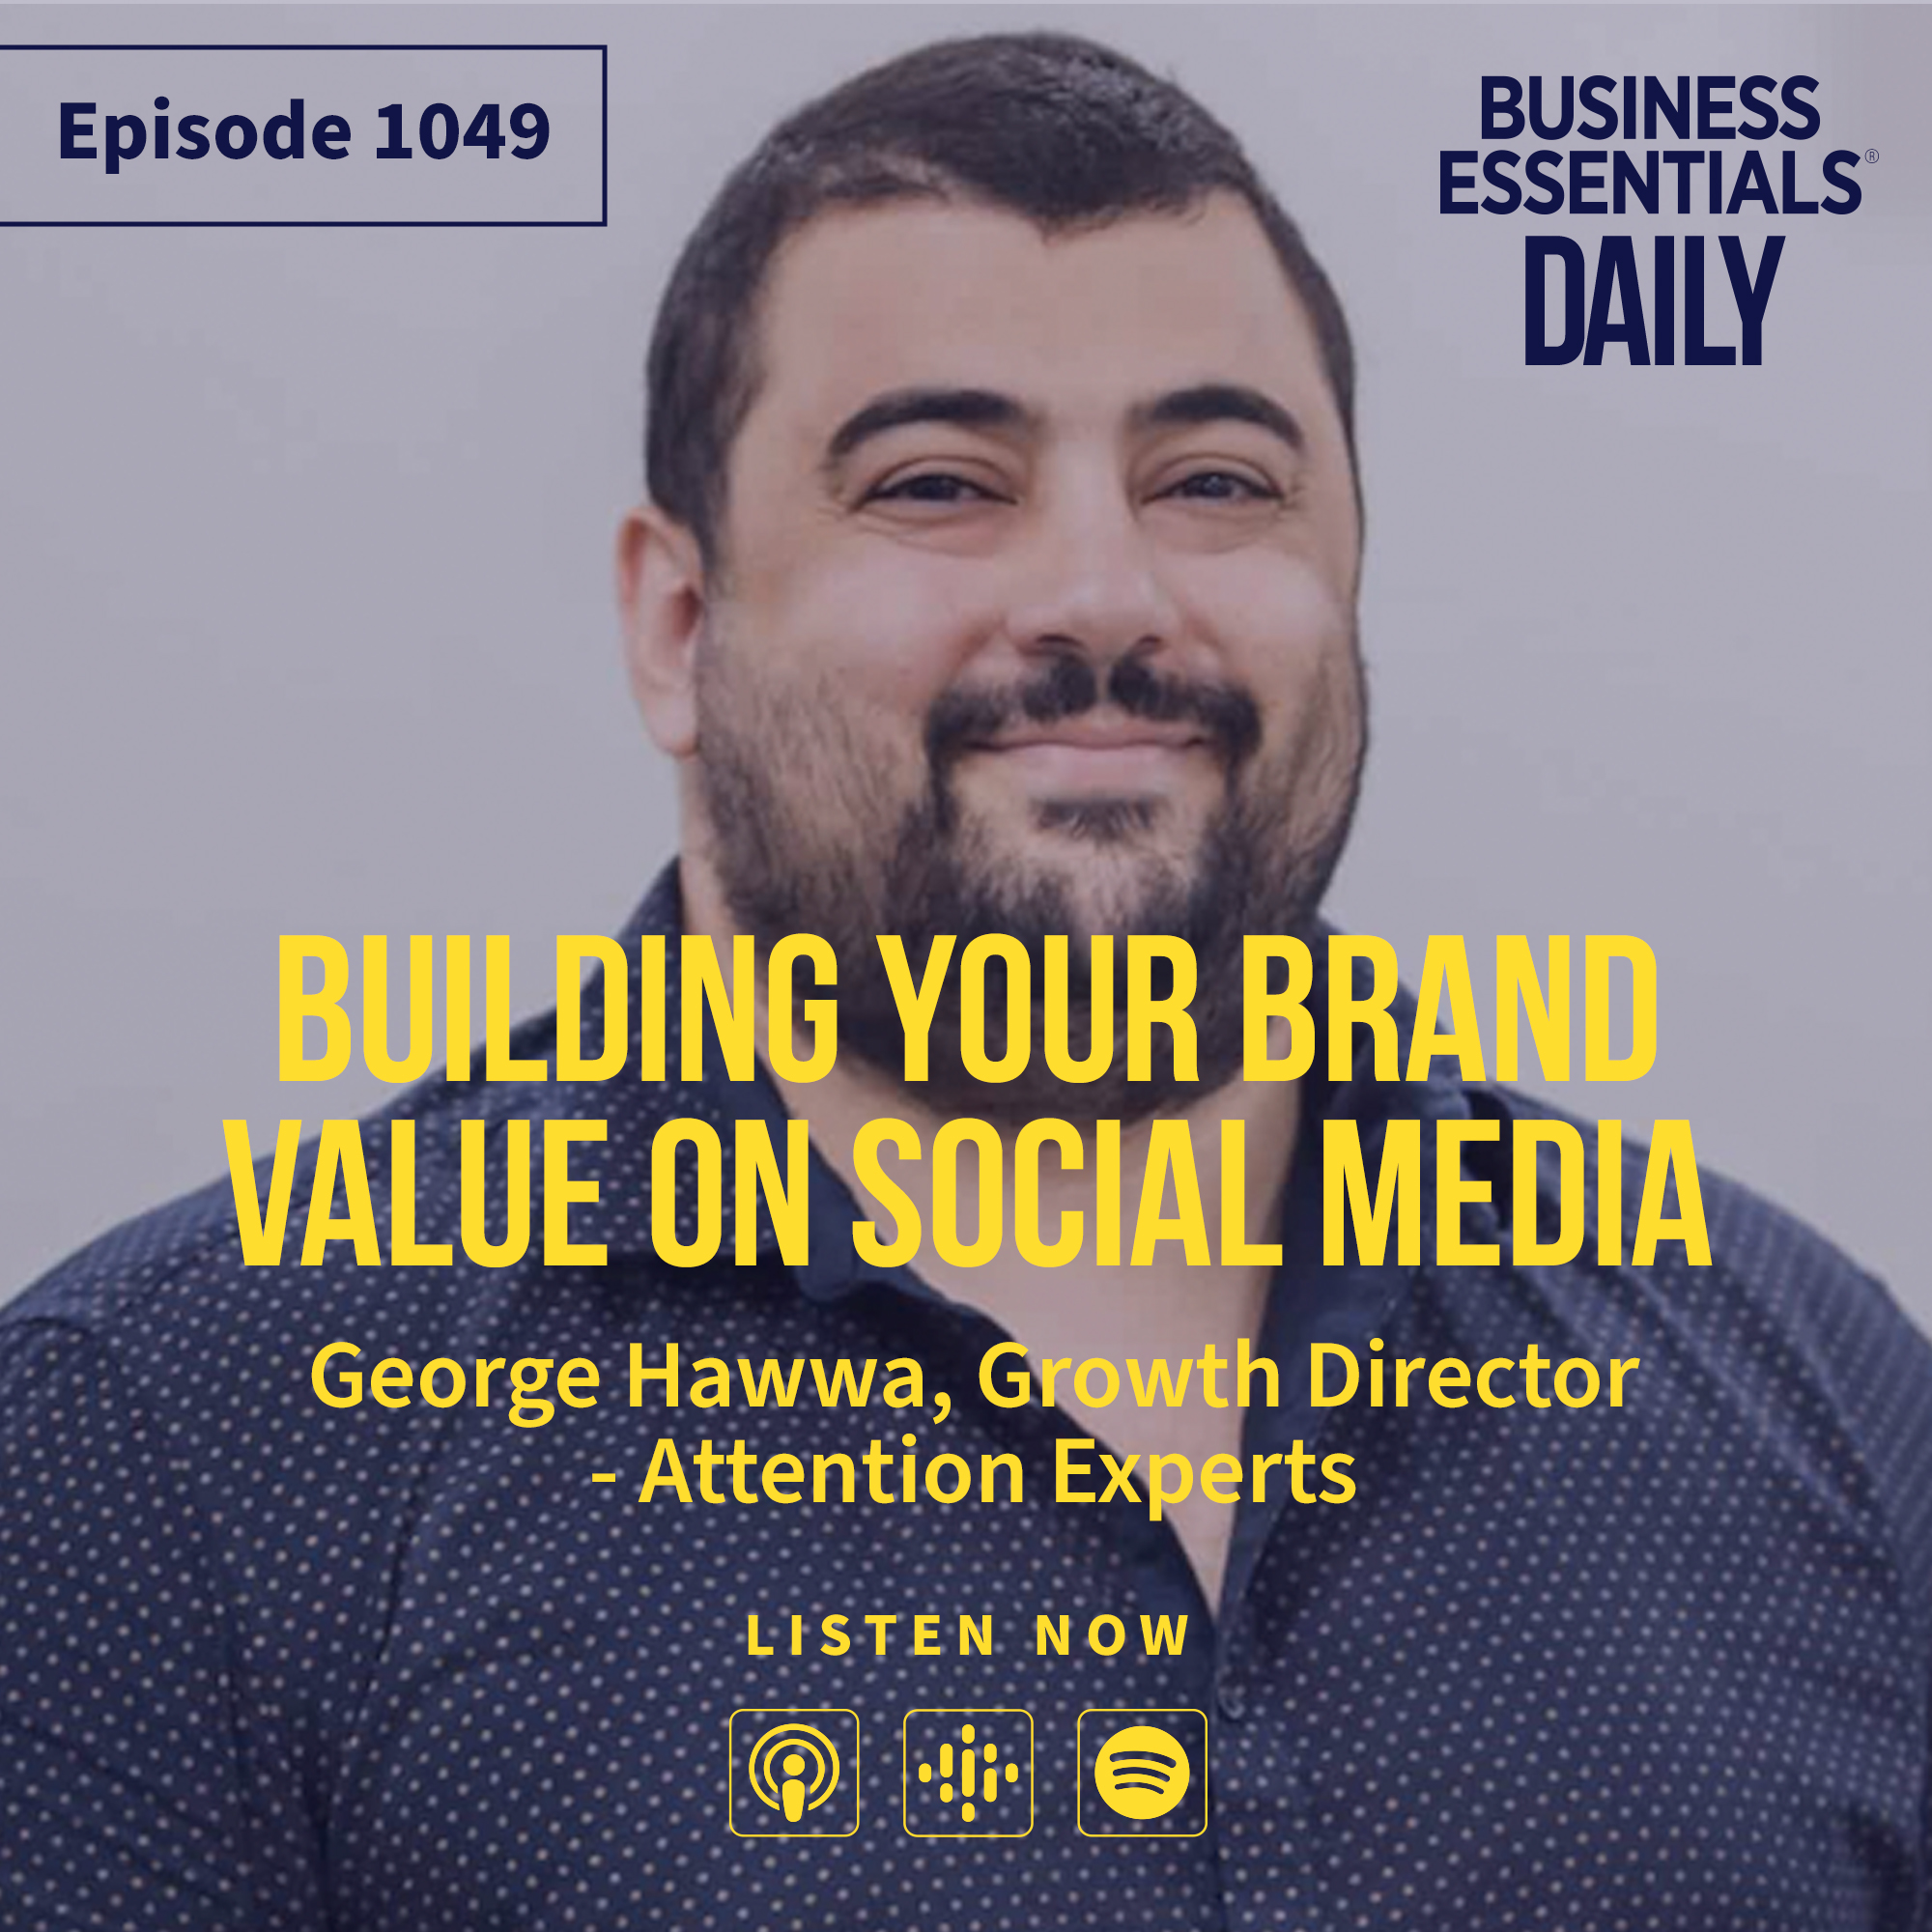 Building your brand value on social media